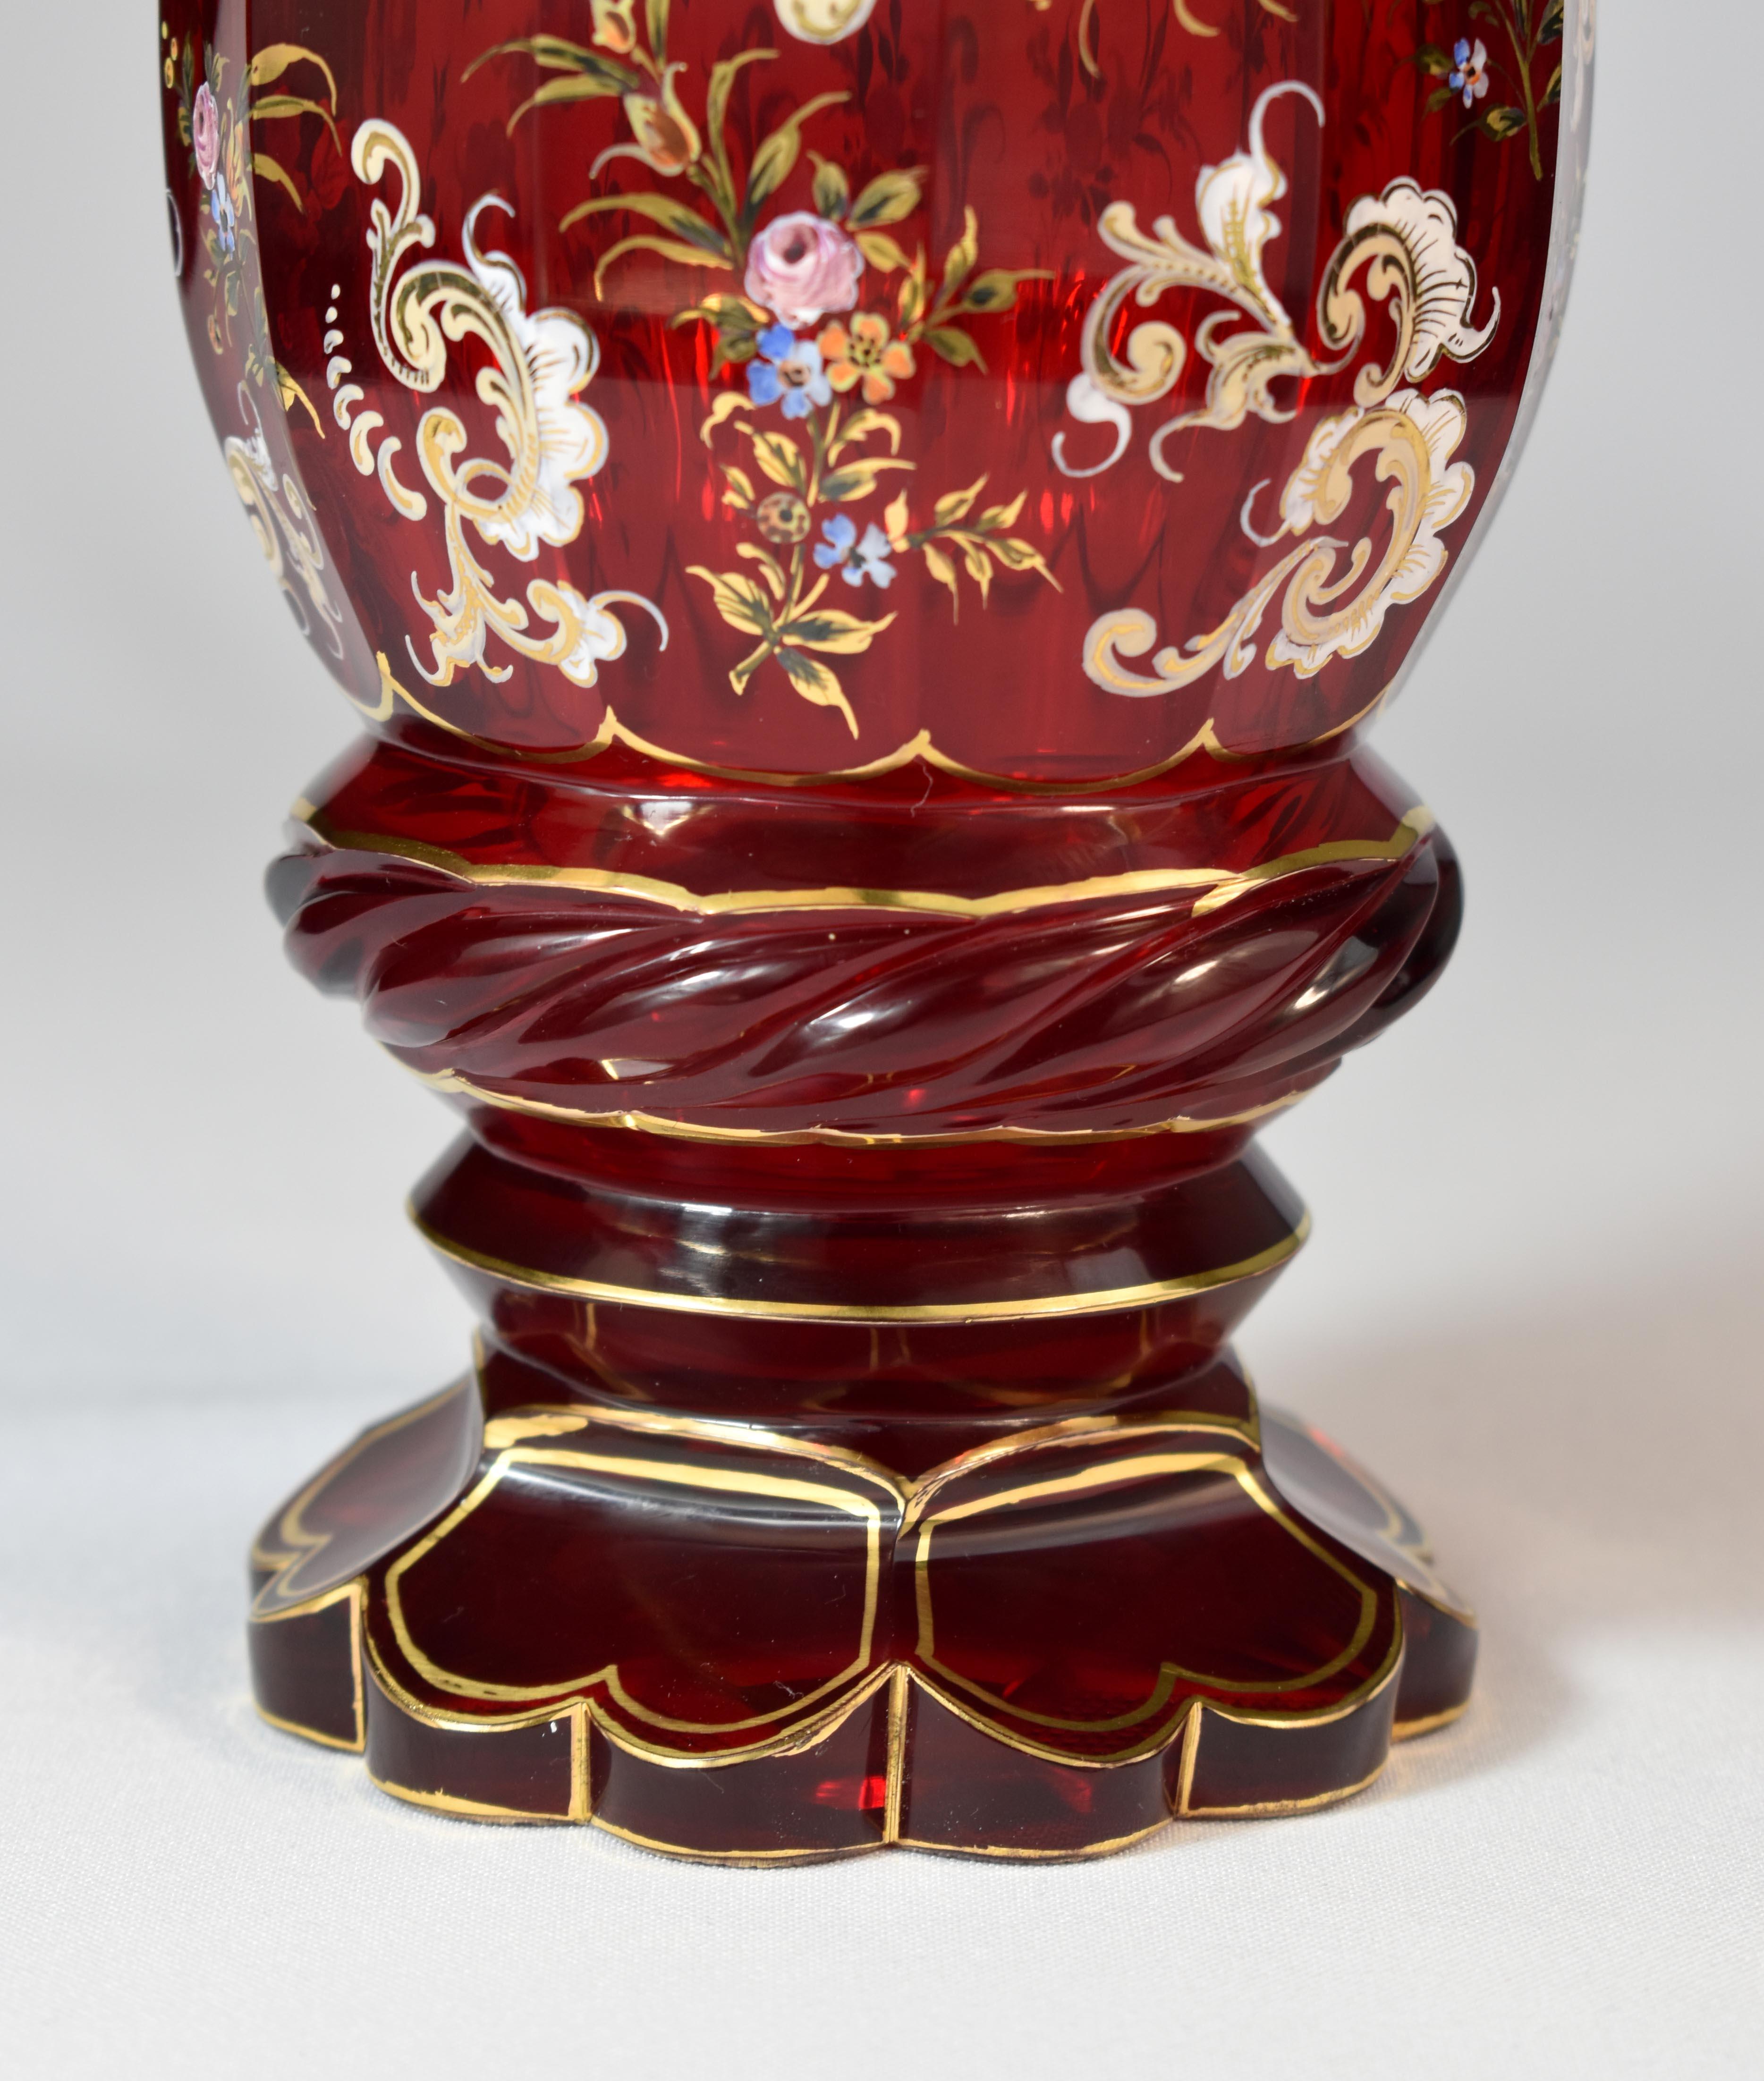 Hand-Painted Floral Motif With Gold Leaf and Swirl Pedestal Vintage Bohemian/Czech Type Hand-Blown Art Glass Vase Made In Japan